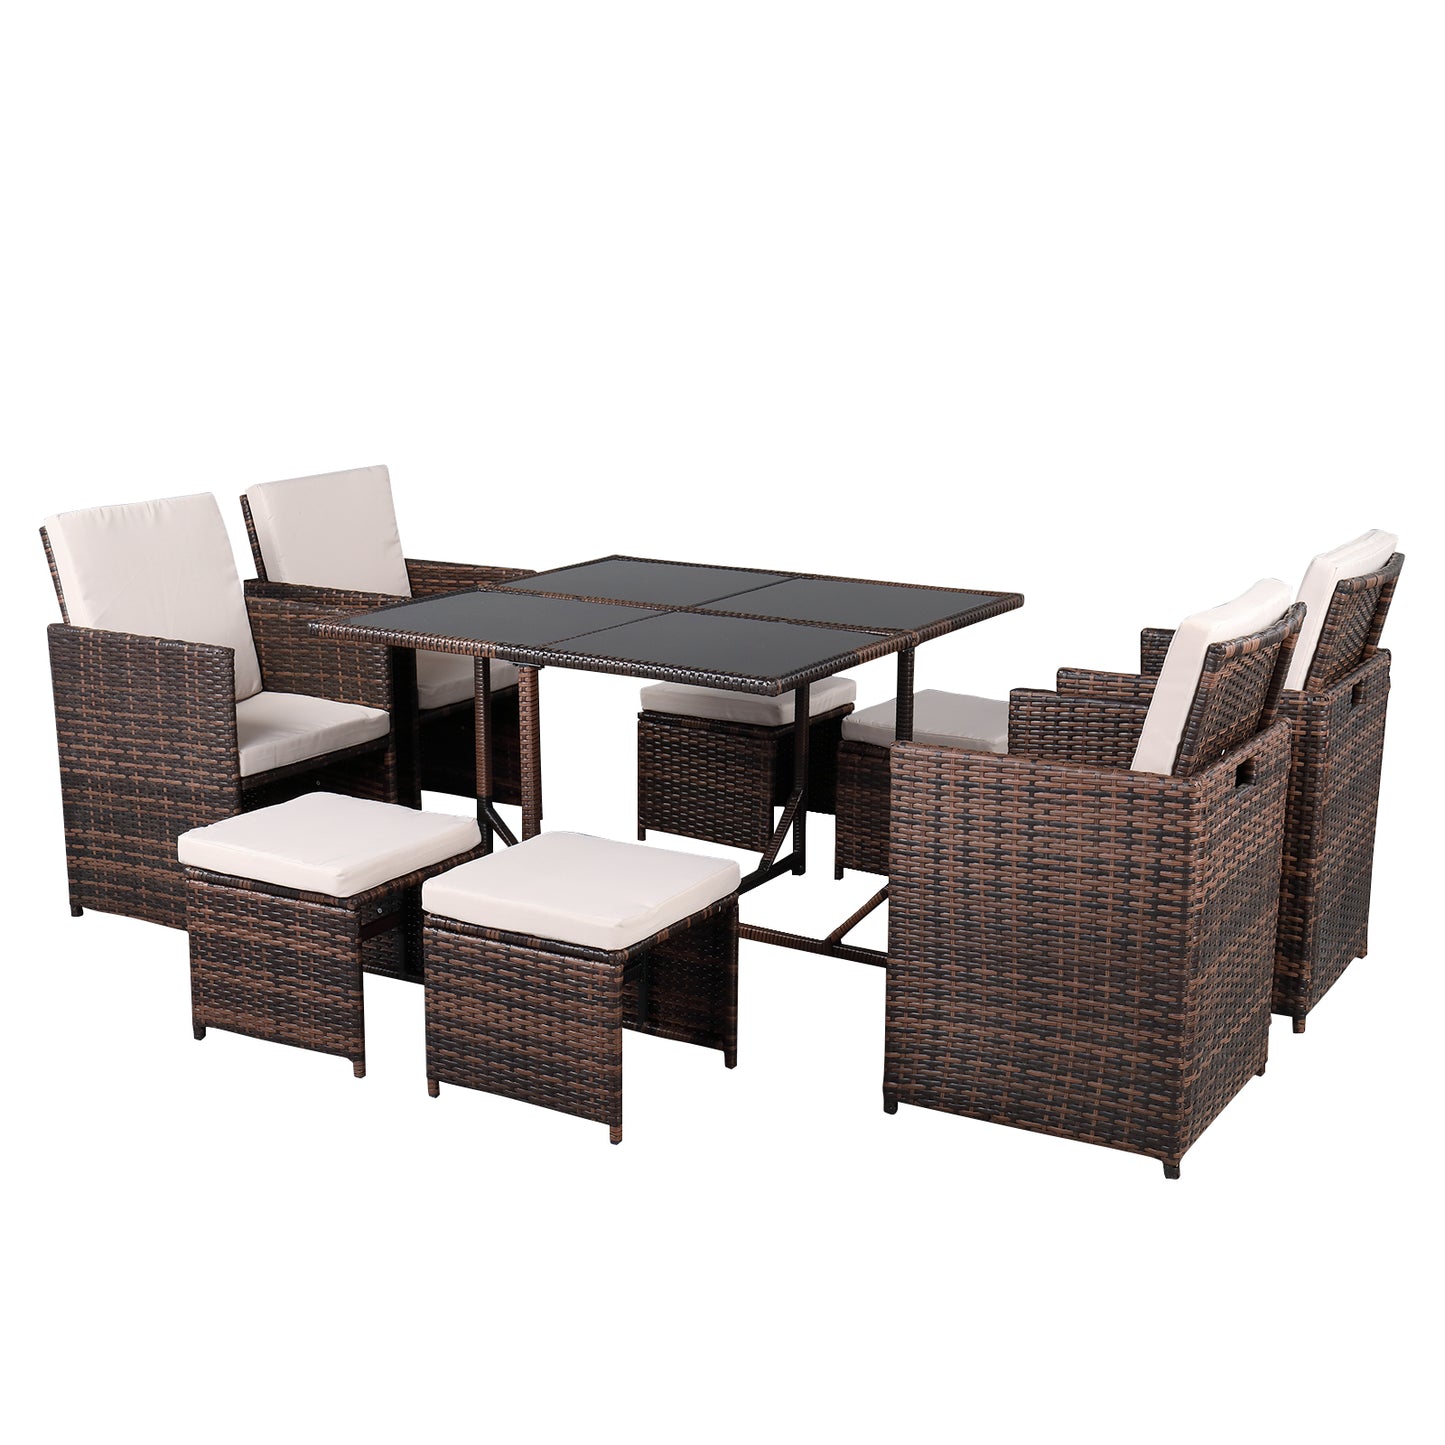 Nine-Piece Table And Chair Set-1 (1/3) Brown Gradient